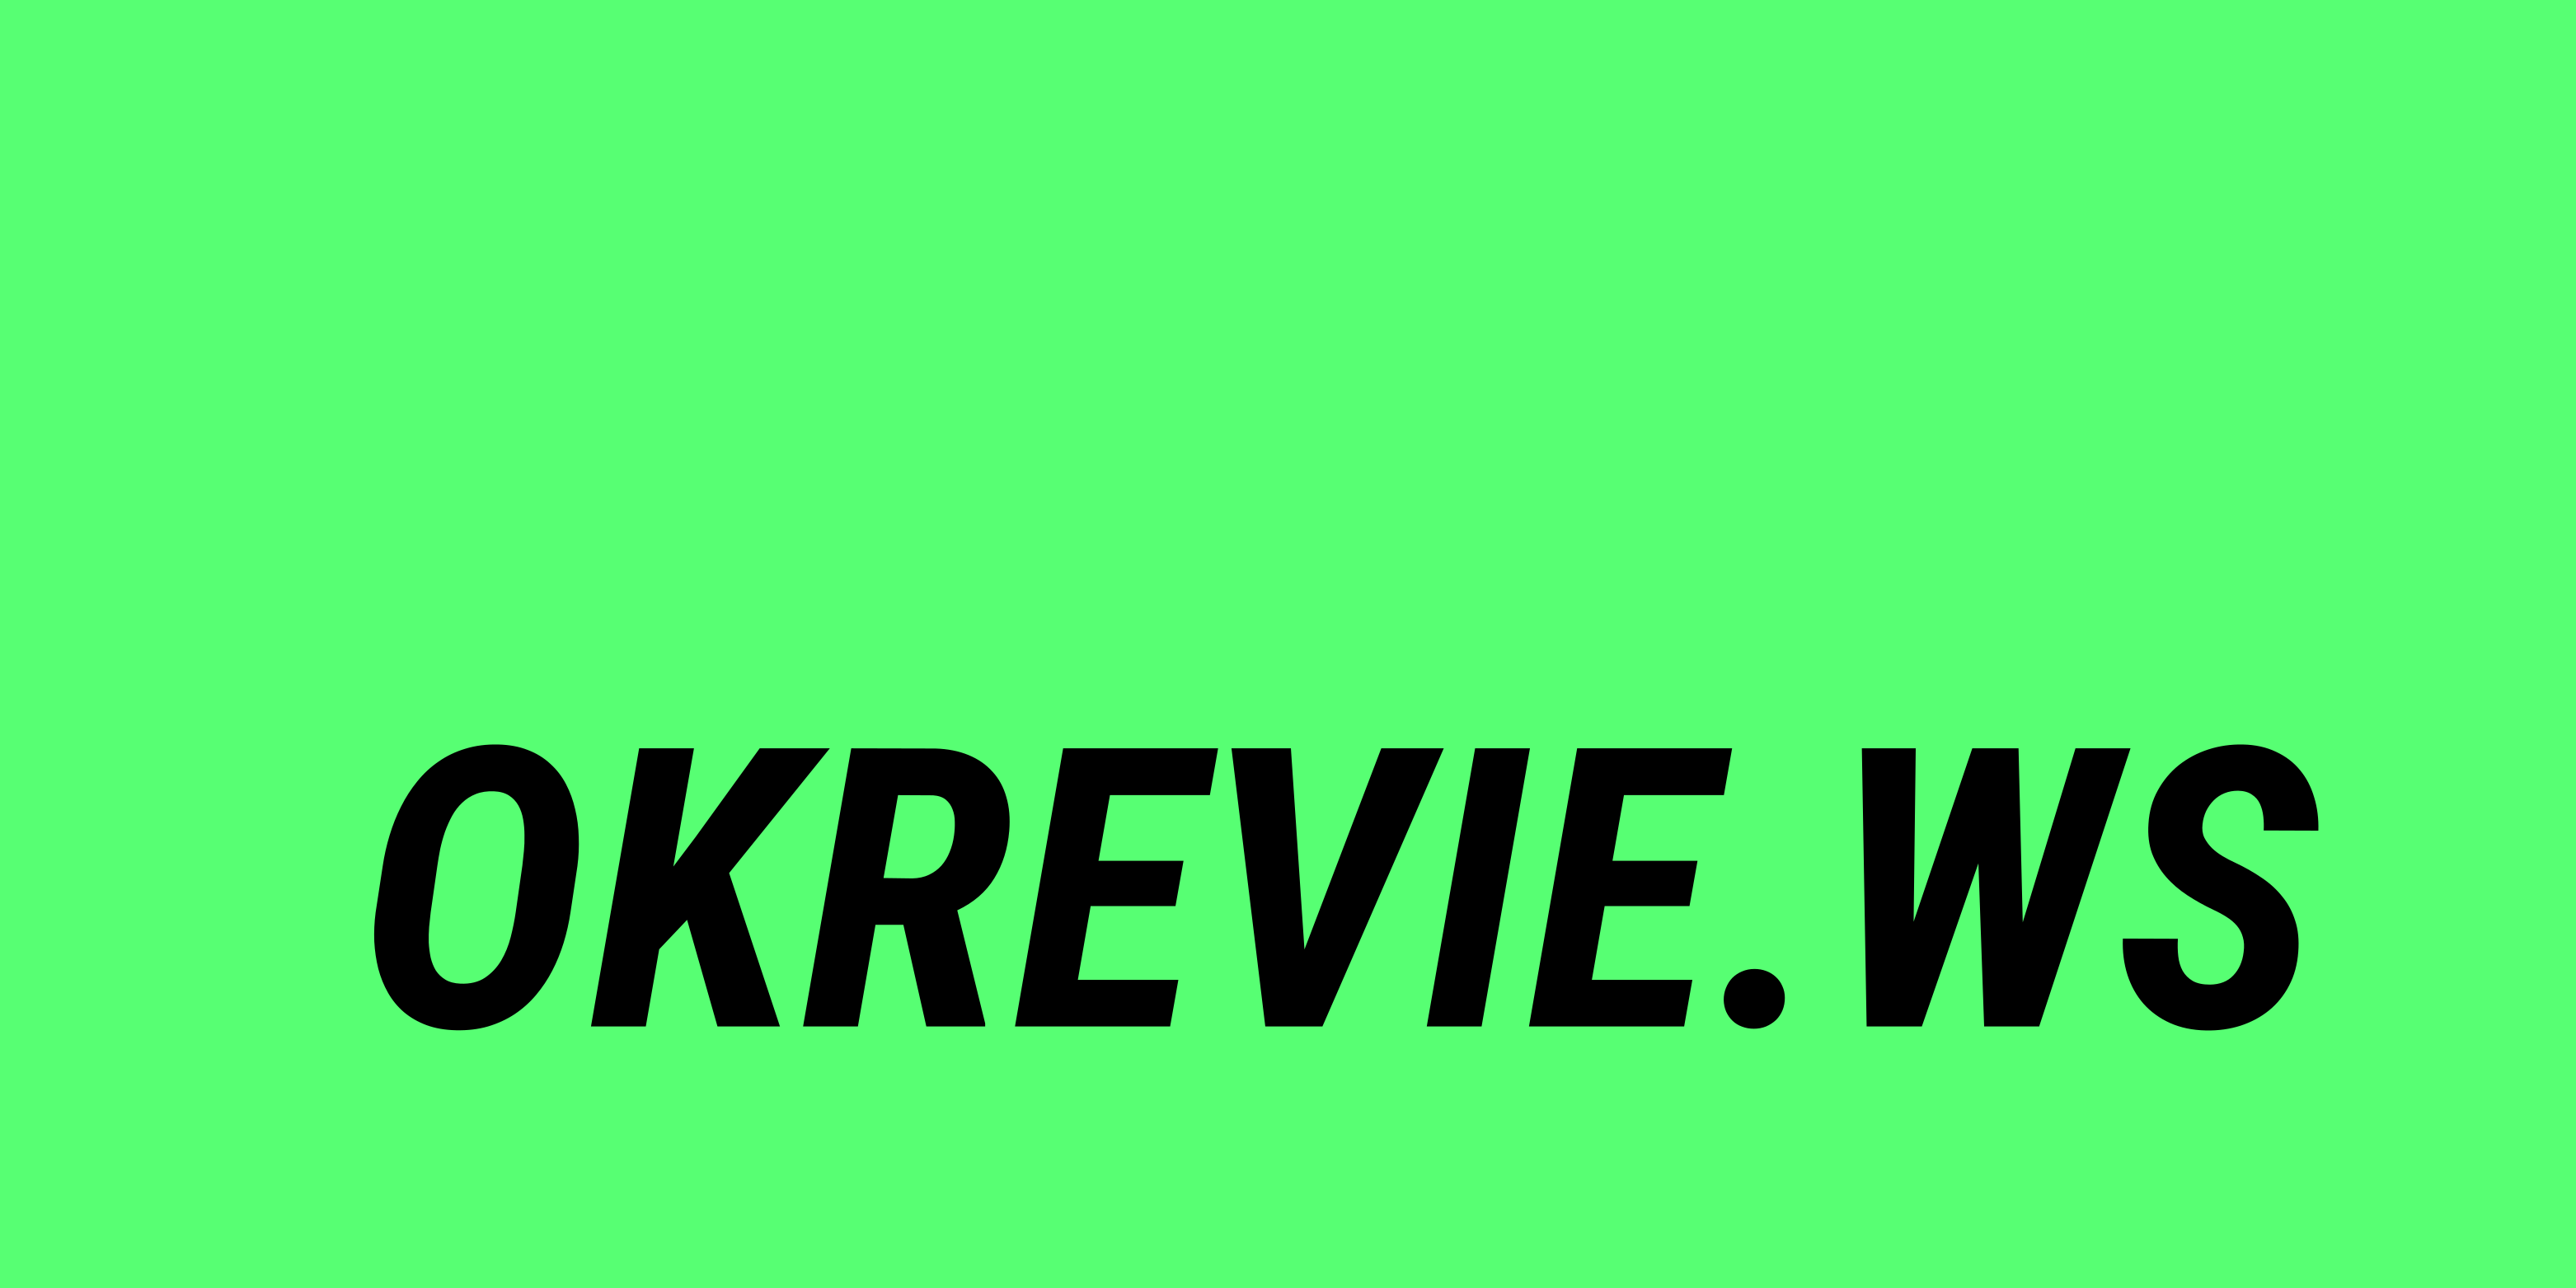 Welcome to okrevie.ws!